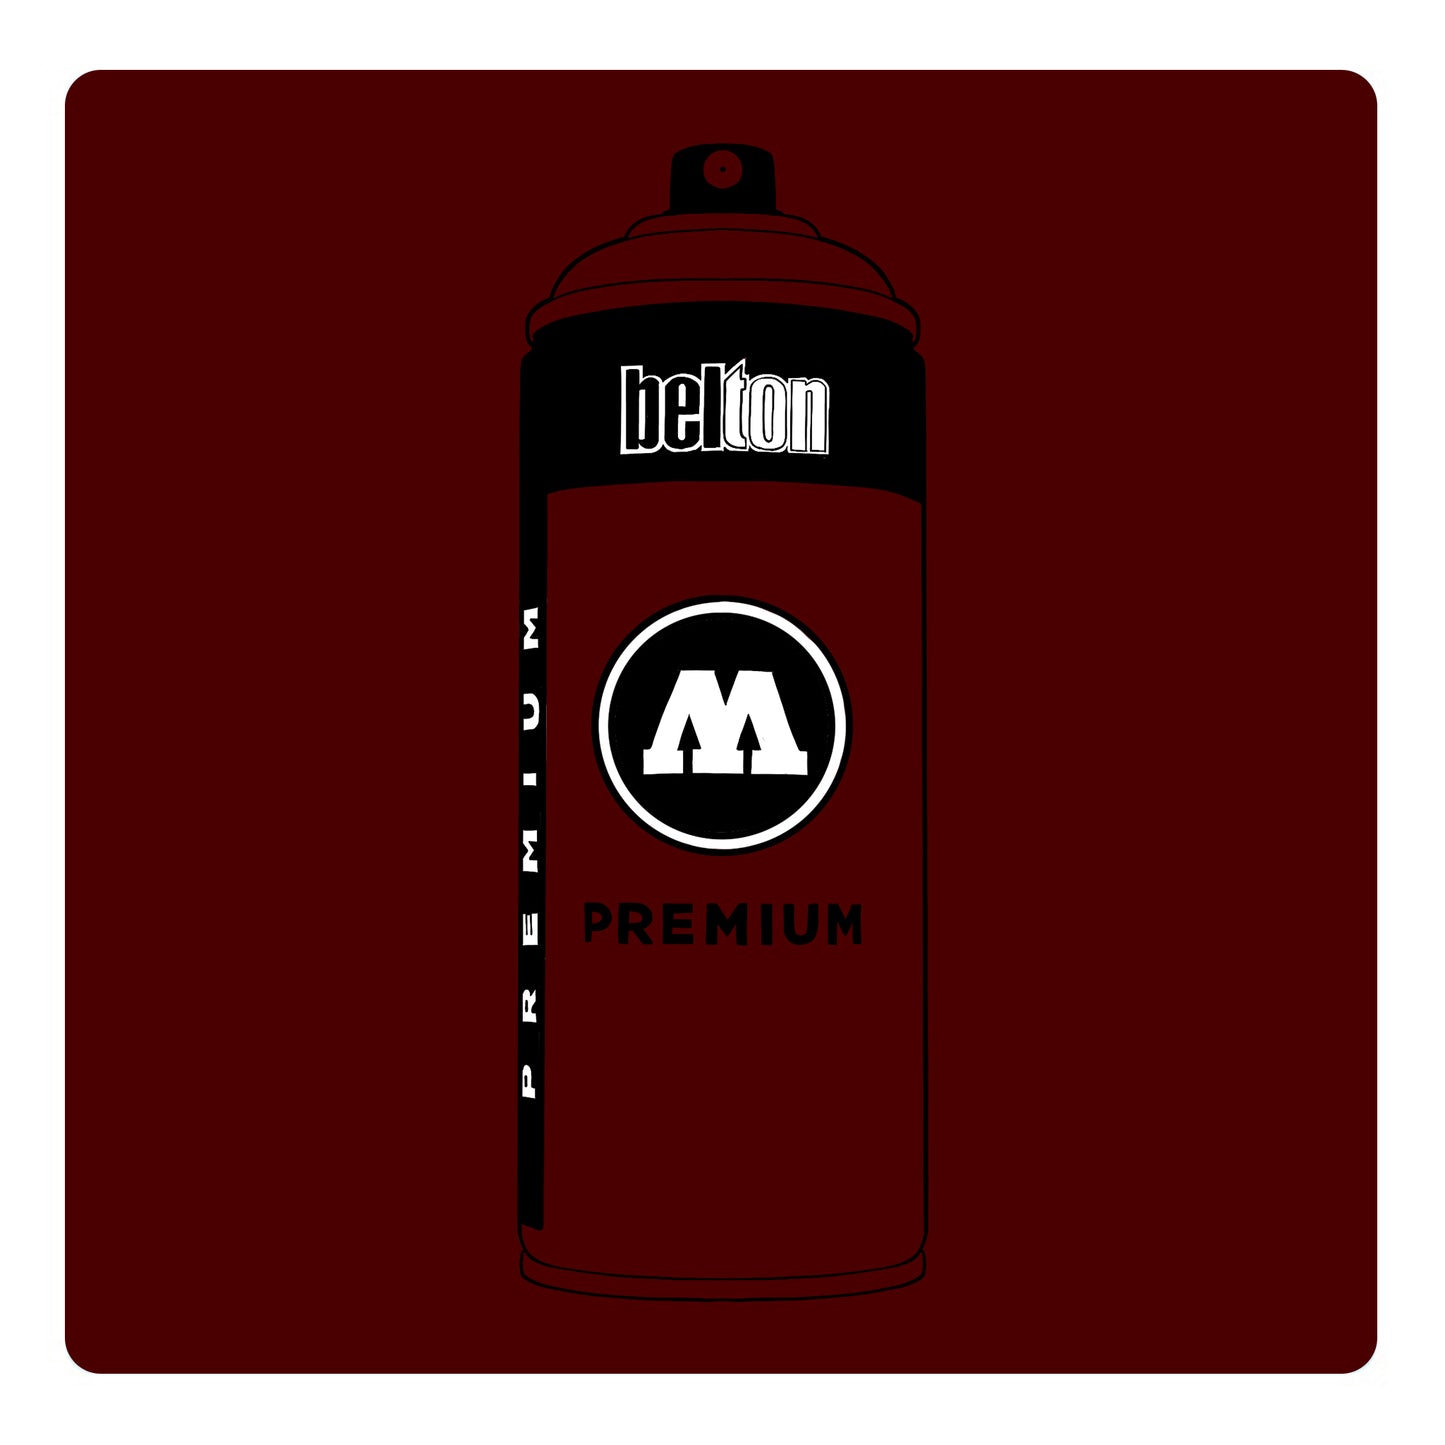 A black outline drawing of a garnet red spray paint can with the words "belton","premium" and the letter"M" written on the face in black and white font. The background is a color swatch of the same garnet red with a white border.